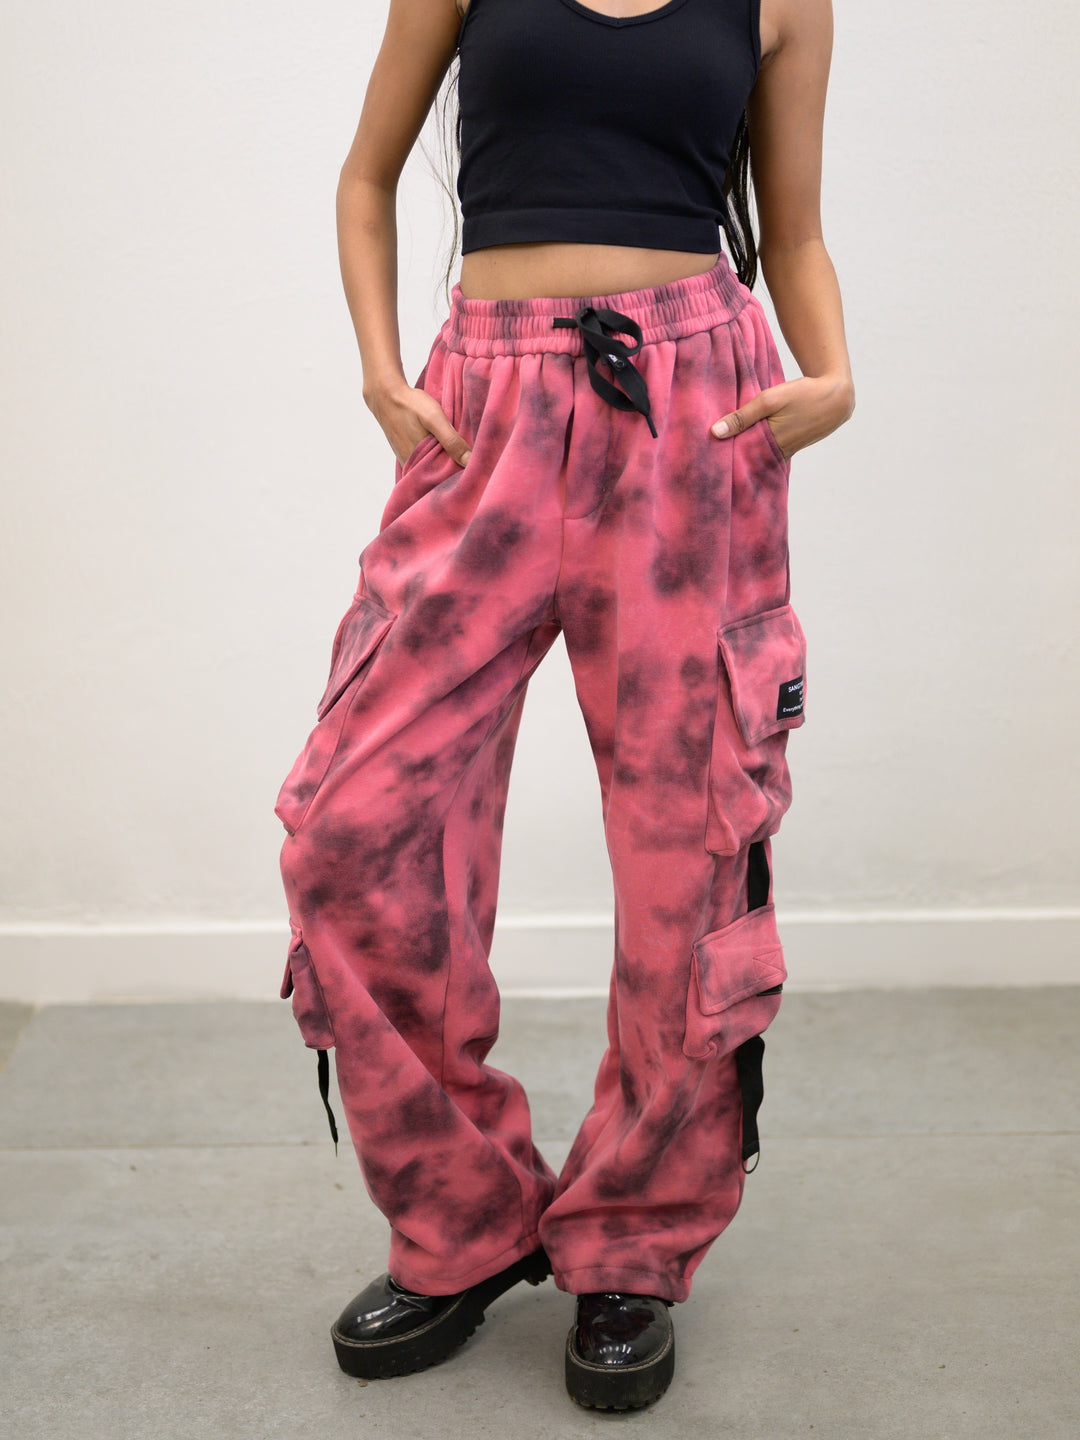 Versatile Pink Tie & Dye Joggers for Every Occasion